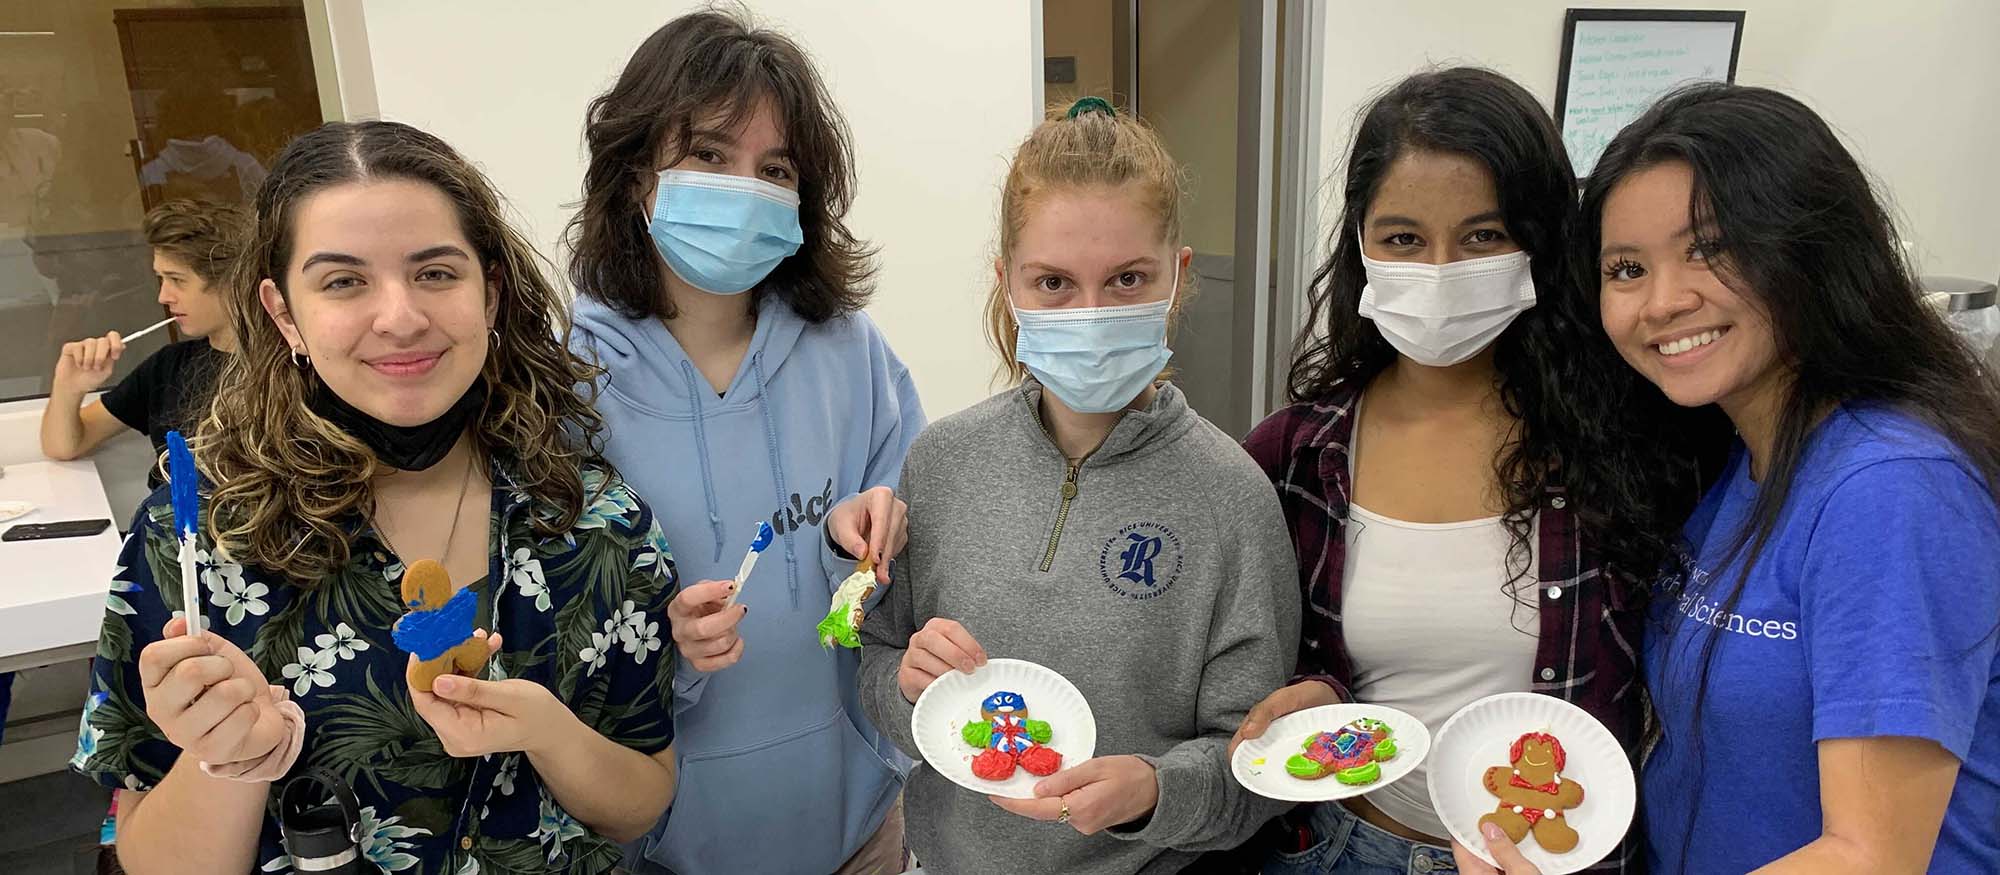 A group of students shows off their cookie decorations at the Martel study break.